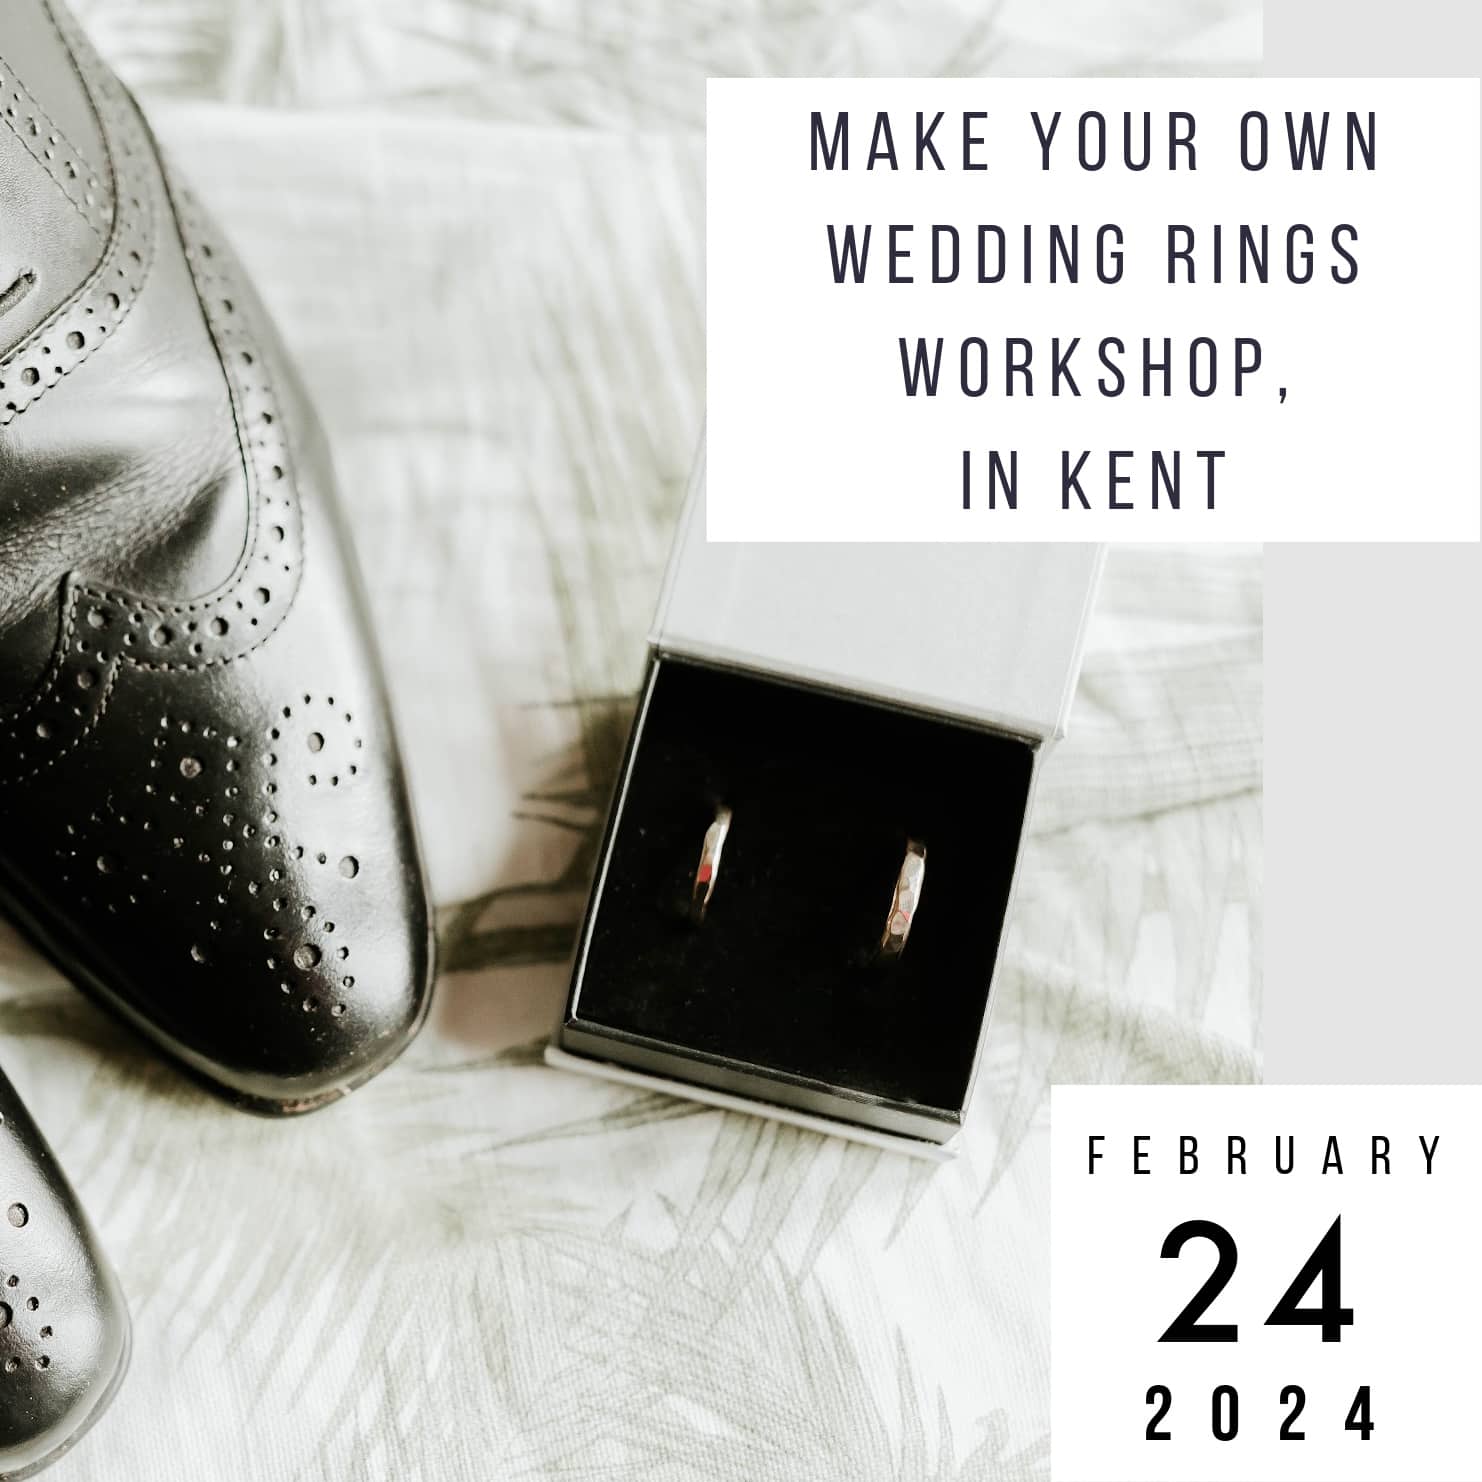 7 24 February 2024 Make Your Own Wedding Rings Workshop 